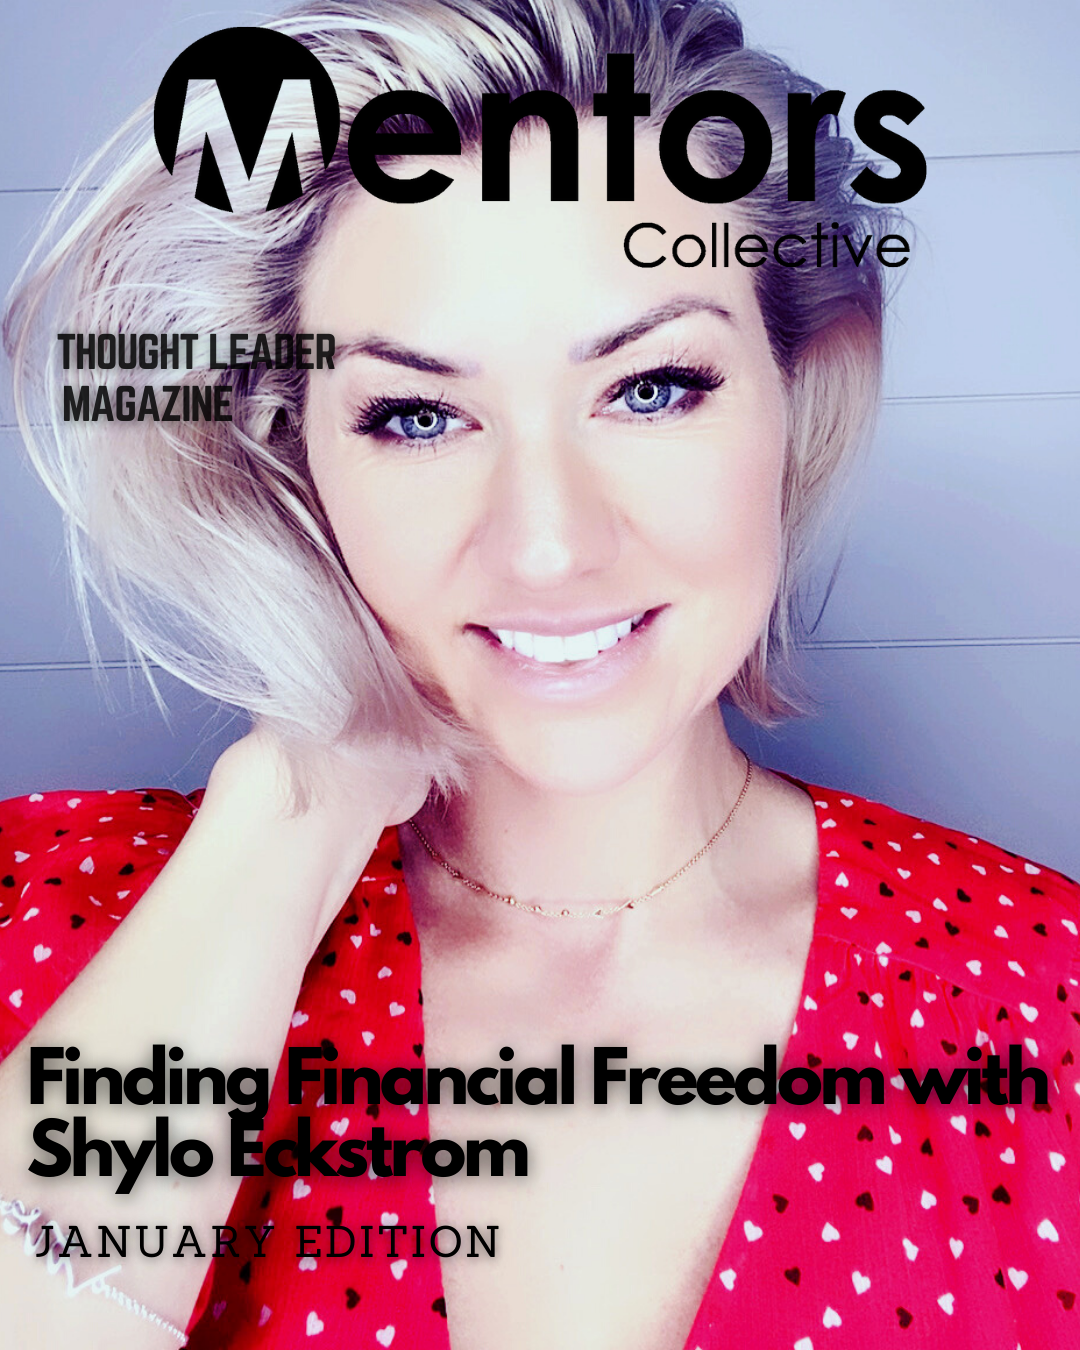 Finding Financial Freedom with Shylo Eckstrom